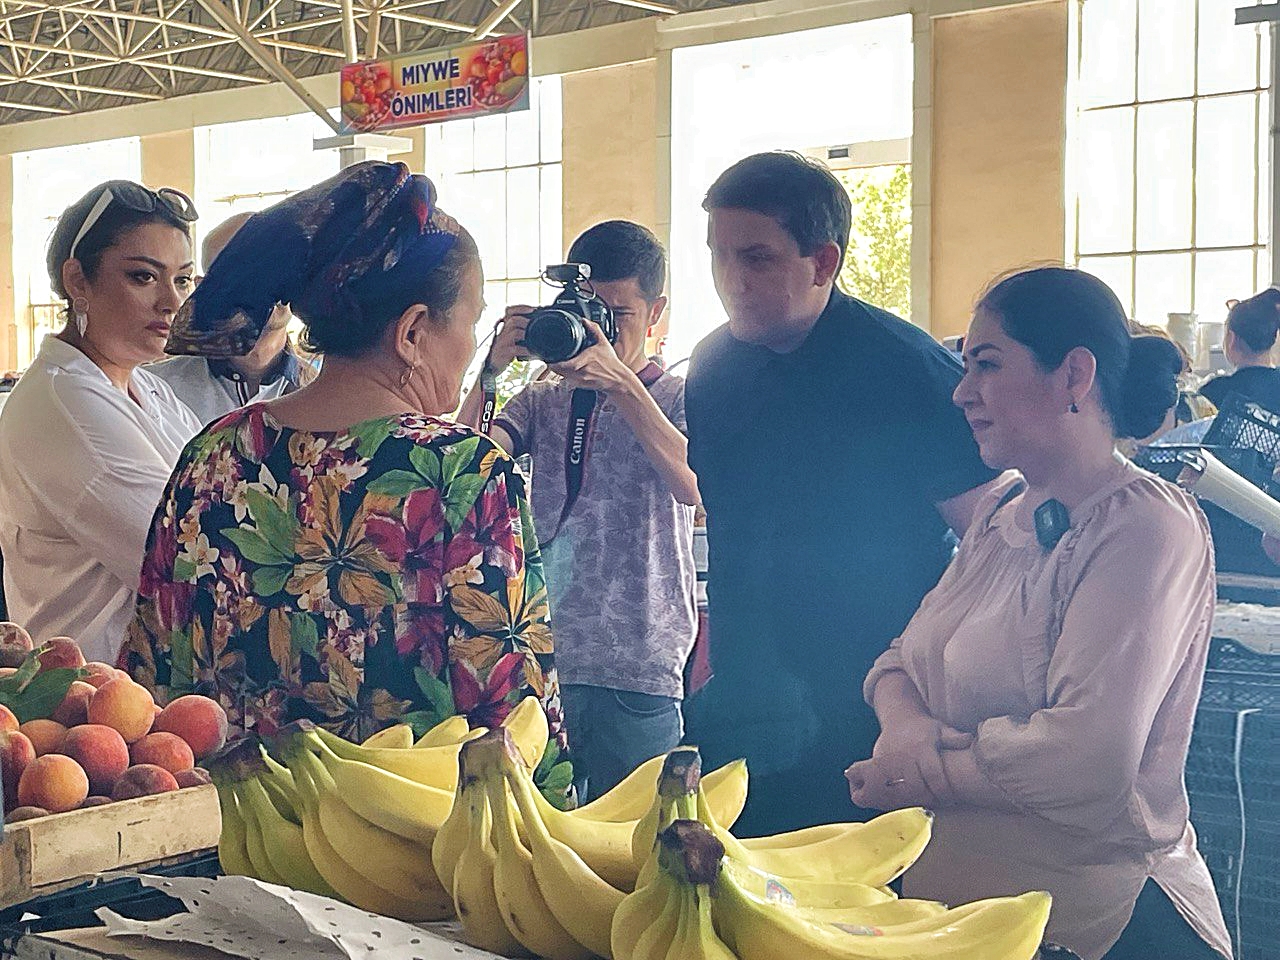 Members of the commission visited the central farmers' market in the city of Nukus, which became the main place of the Karakalpak events, in order to study the mood of the people